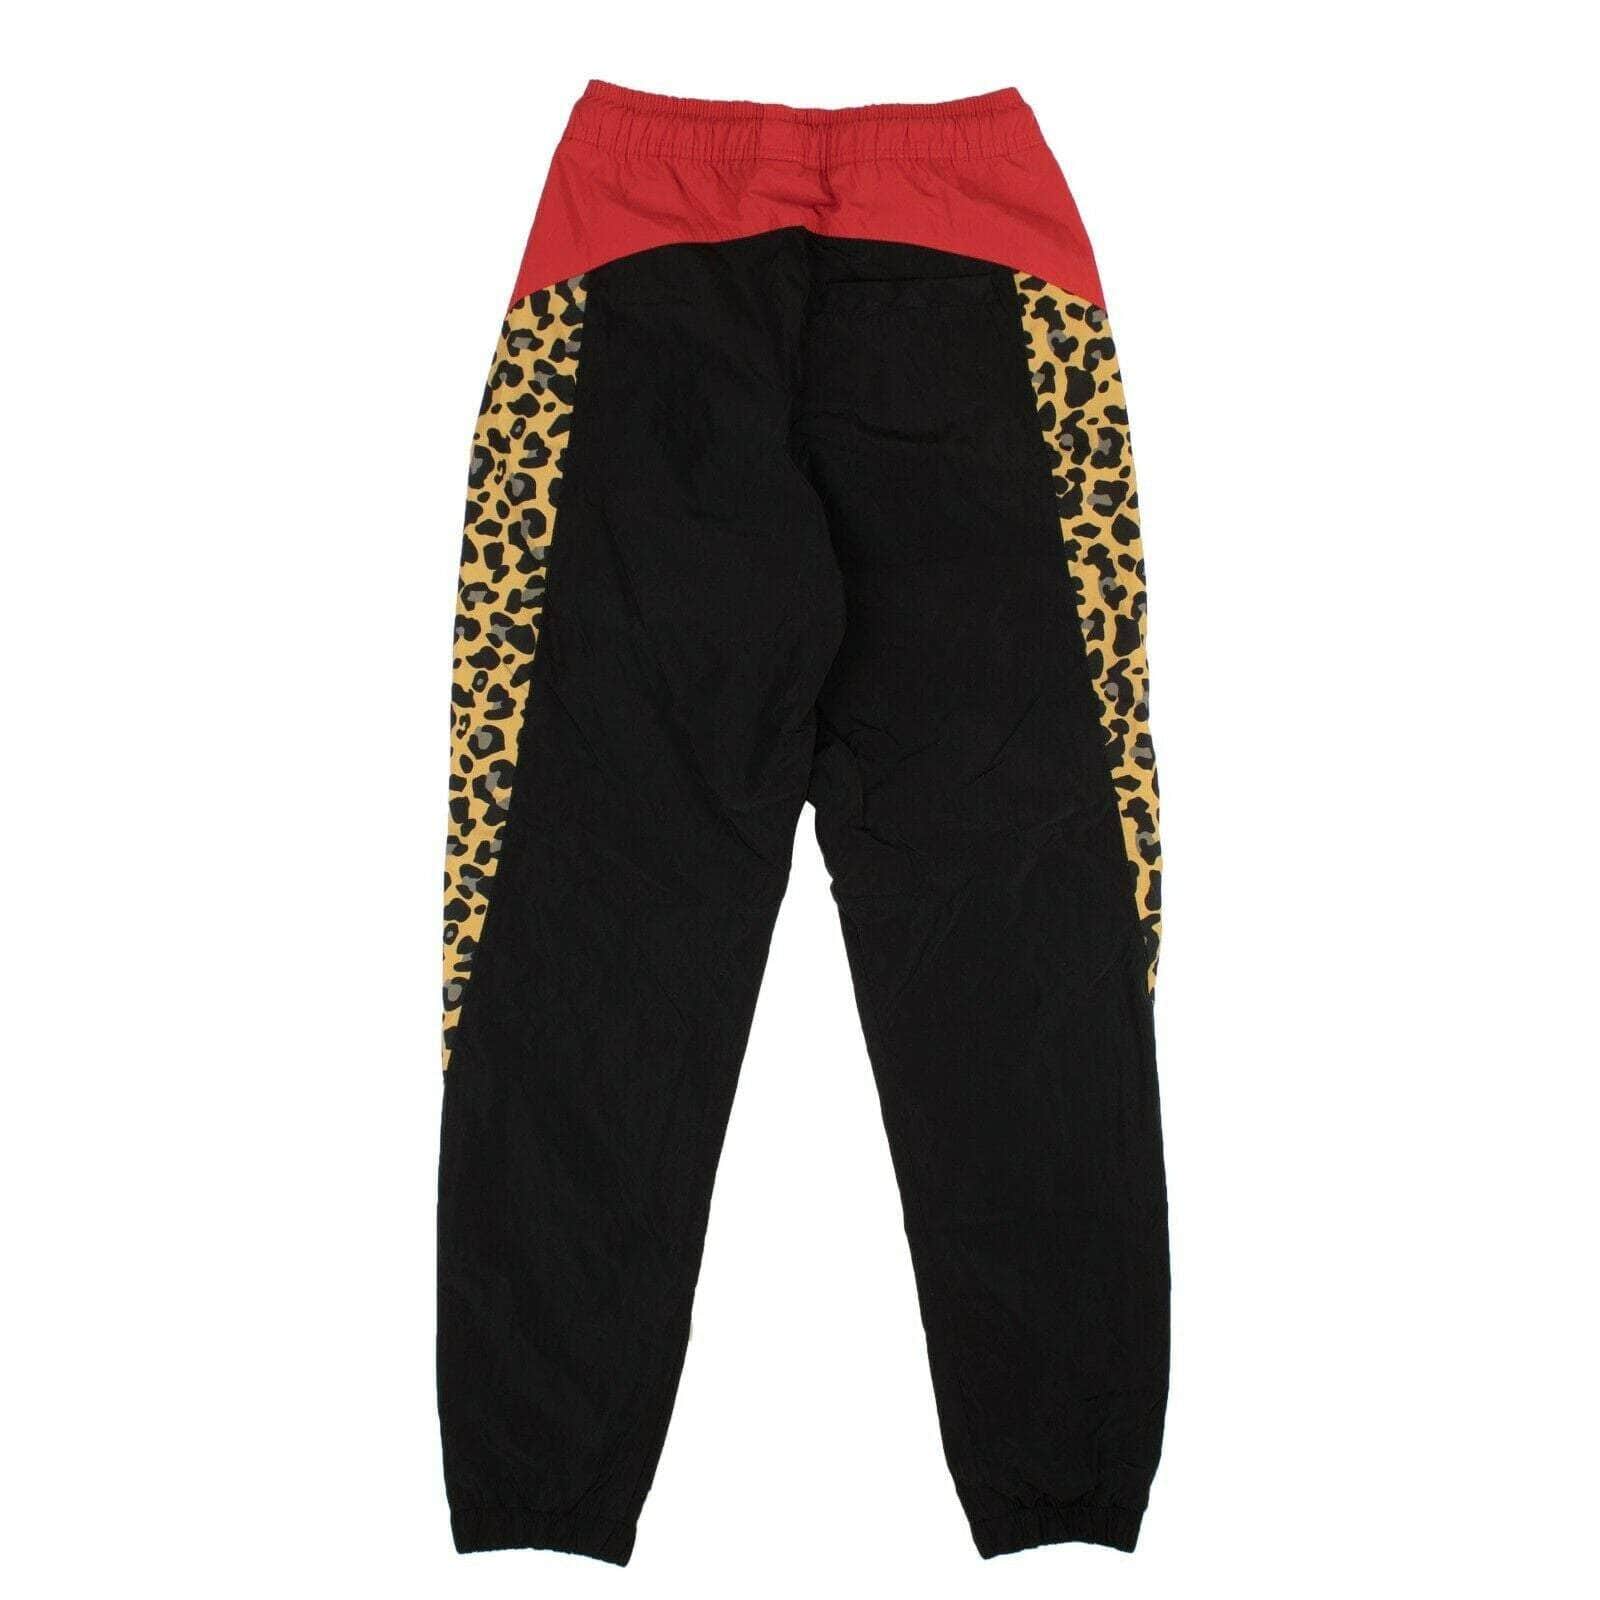 Black And Red Leopard Track Pants - GBNY